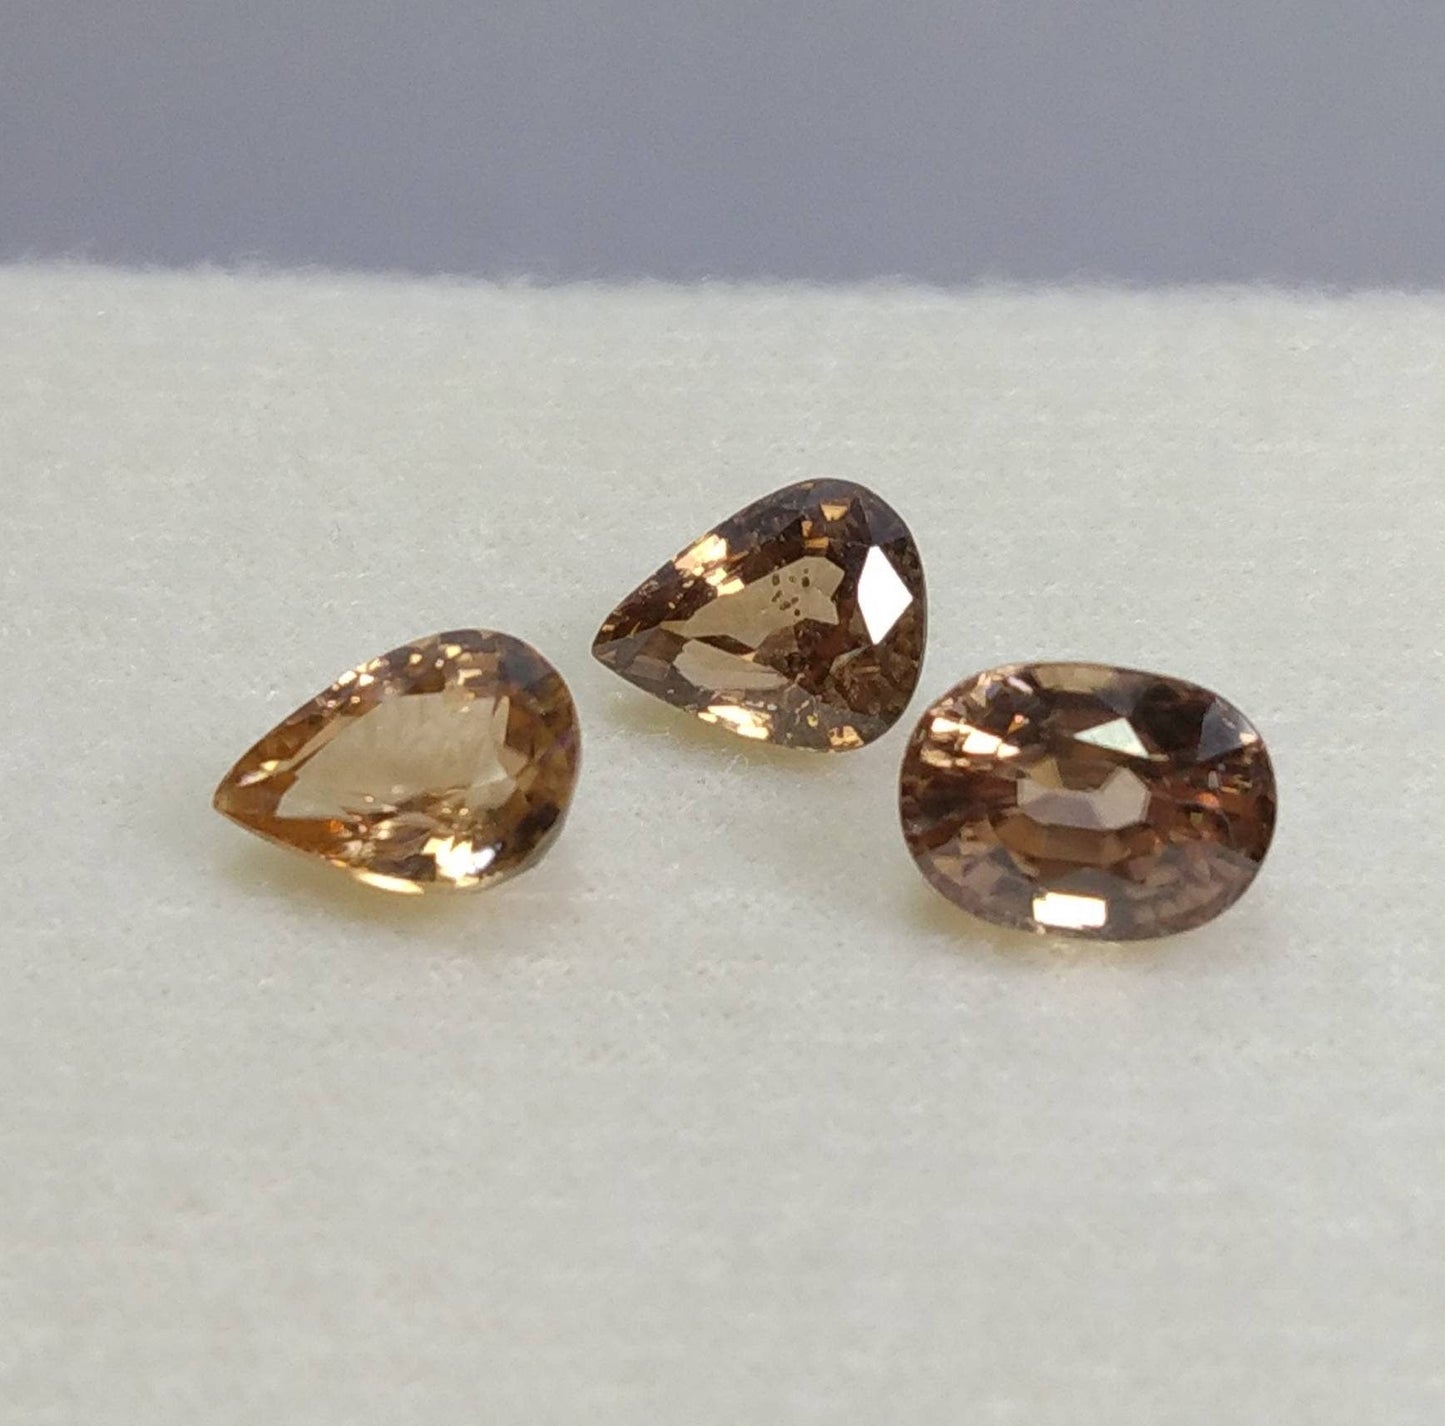 ARSAA GEMS AND MINERALSNatural top quality beautiful 10 carats Small sized set of faceted VV clarity zircon gems - Premium  from ARSAA GEMS AND MINERALS - Just $50.00! Shop now at ARSAA GEMS AND MINERALS